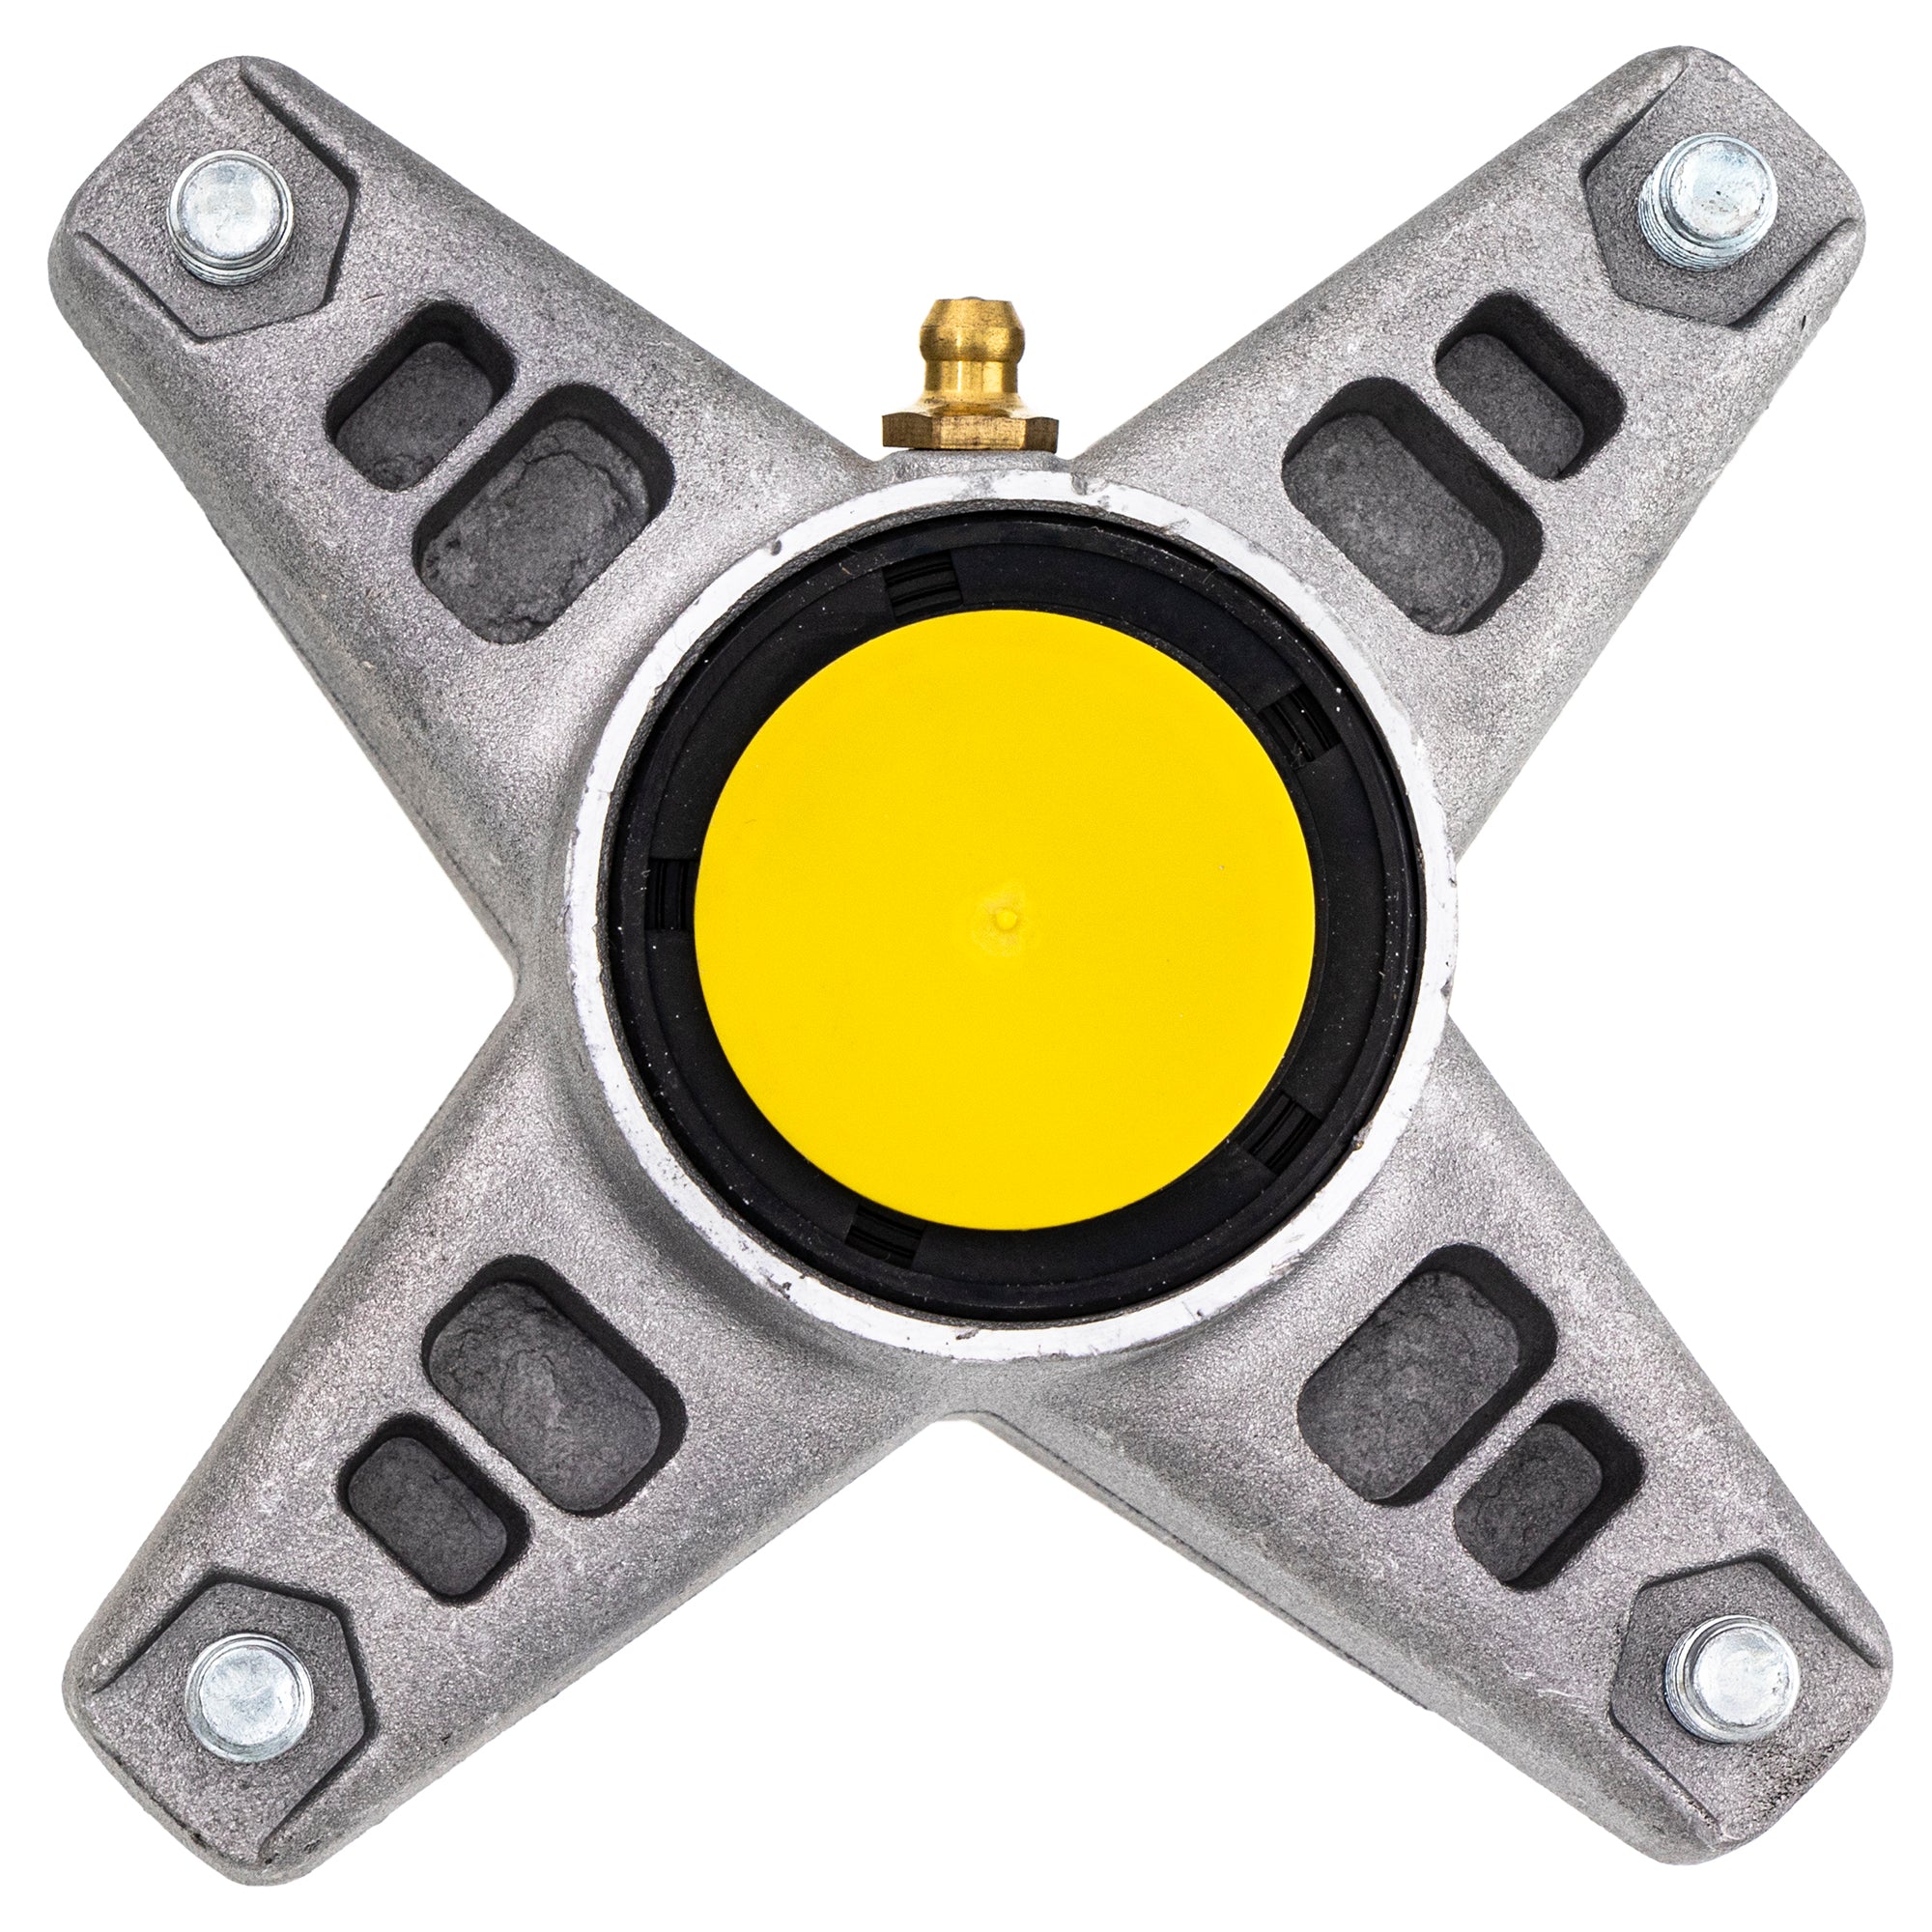 Deck Spindle For Cub Cadet White Outdoor Craftsman 918-3129C 918-04394  618-04426 618-3129C 918-04426